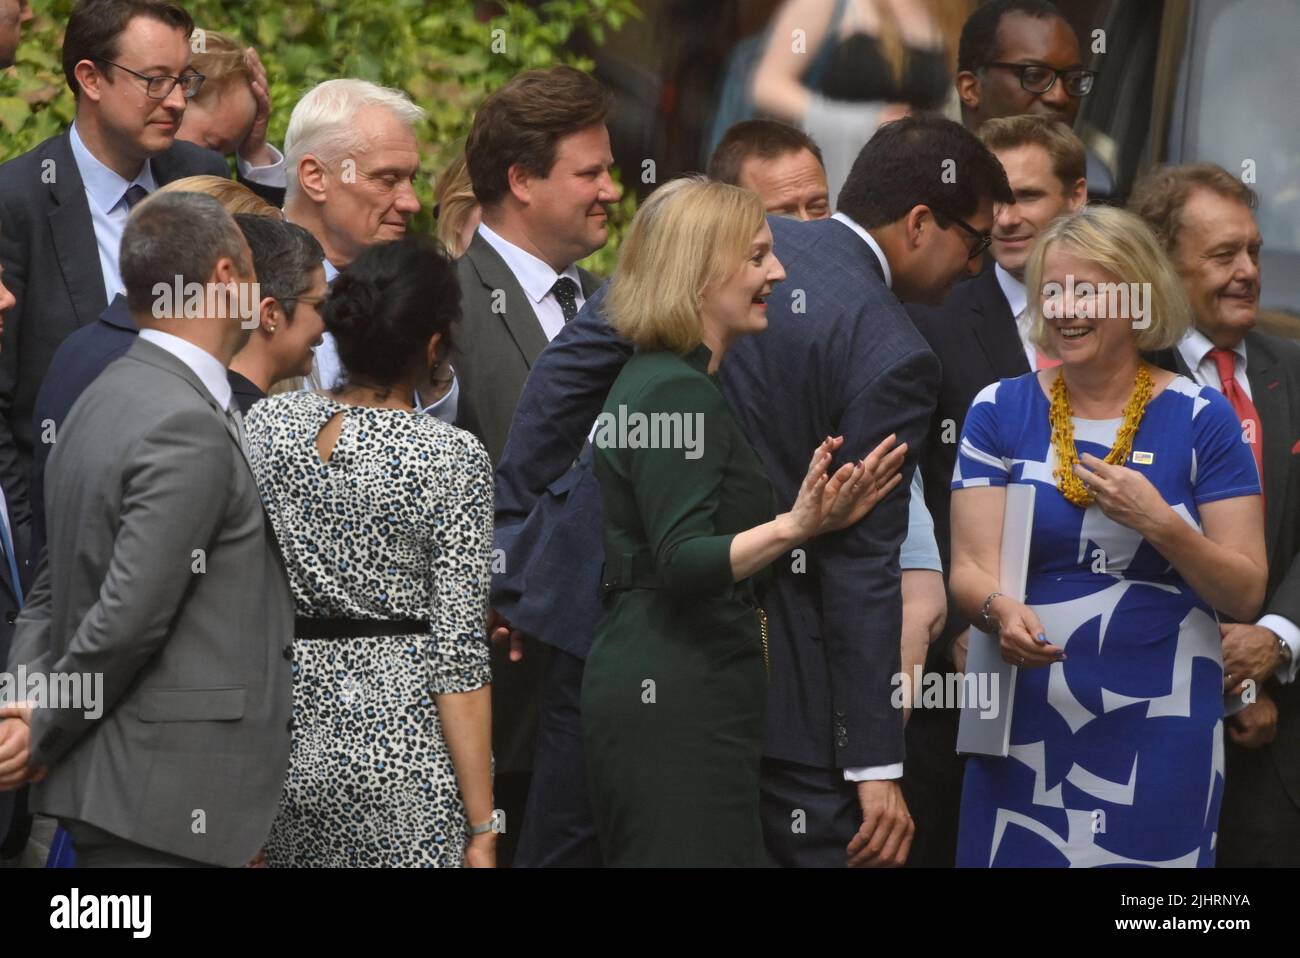 British Foreign Secretary and Conservative leadership candidate Liz Truss greets supporters and members of her team near the houses of Parliament, in London, Britain, July 20, 2022. REUTERS/Toby Melville Stock Photo